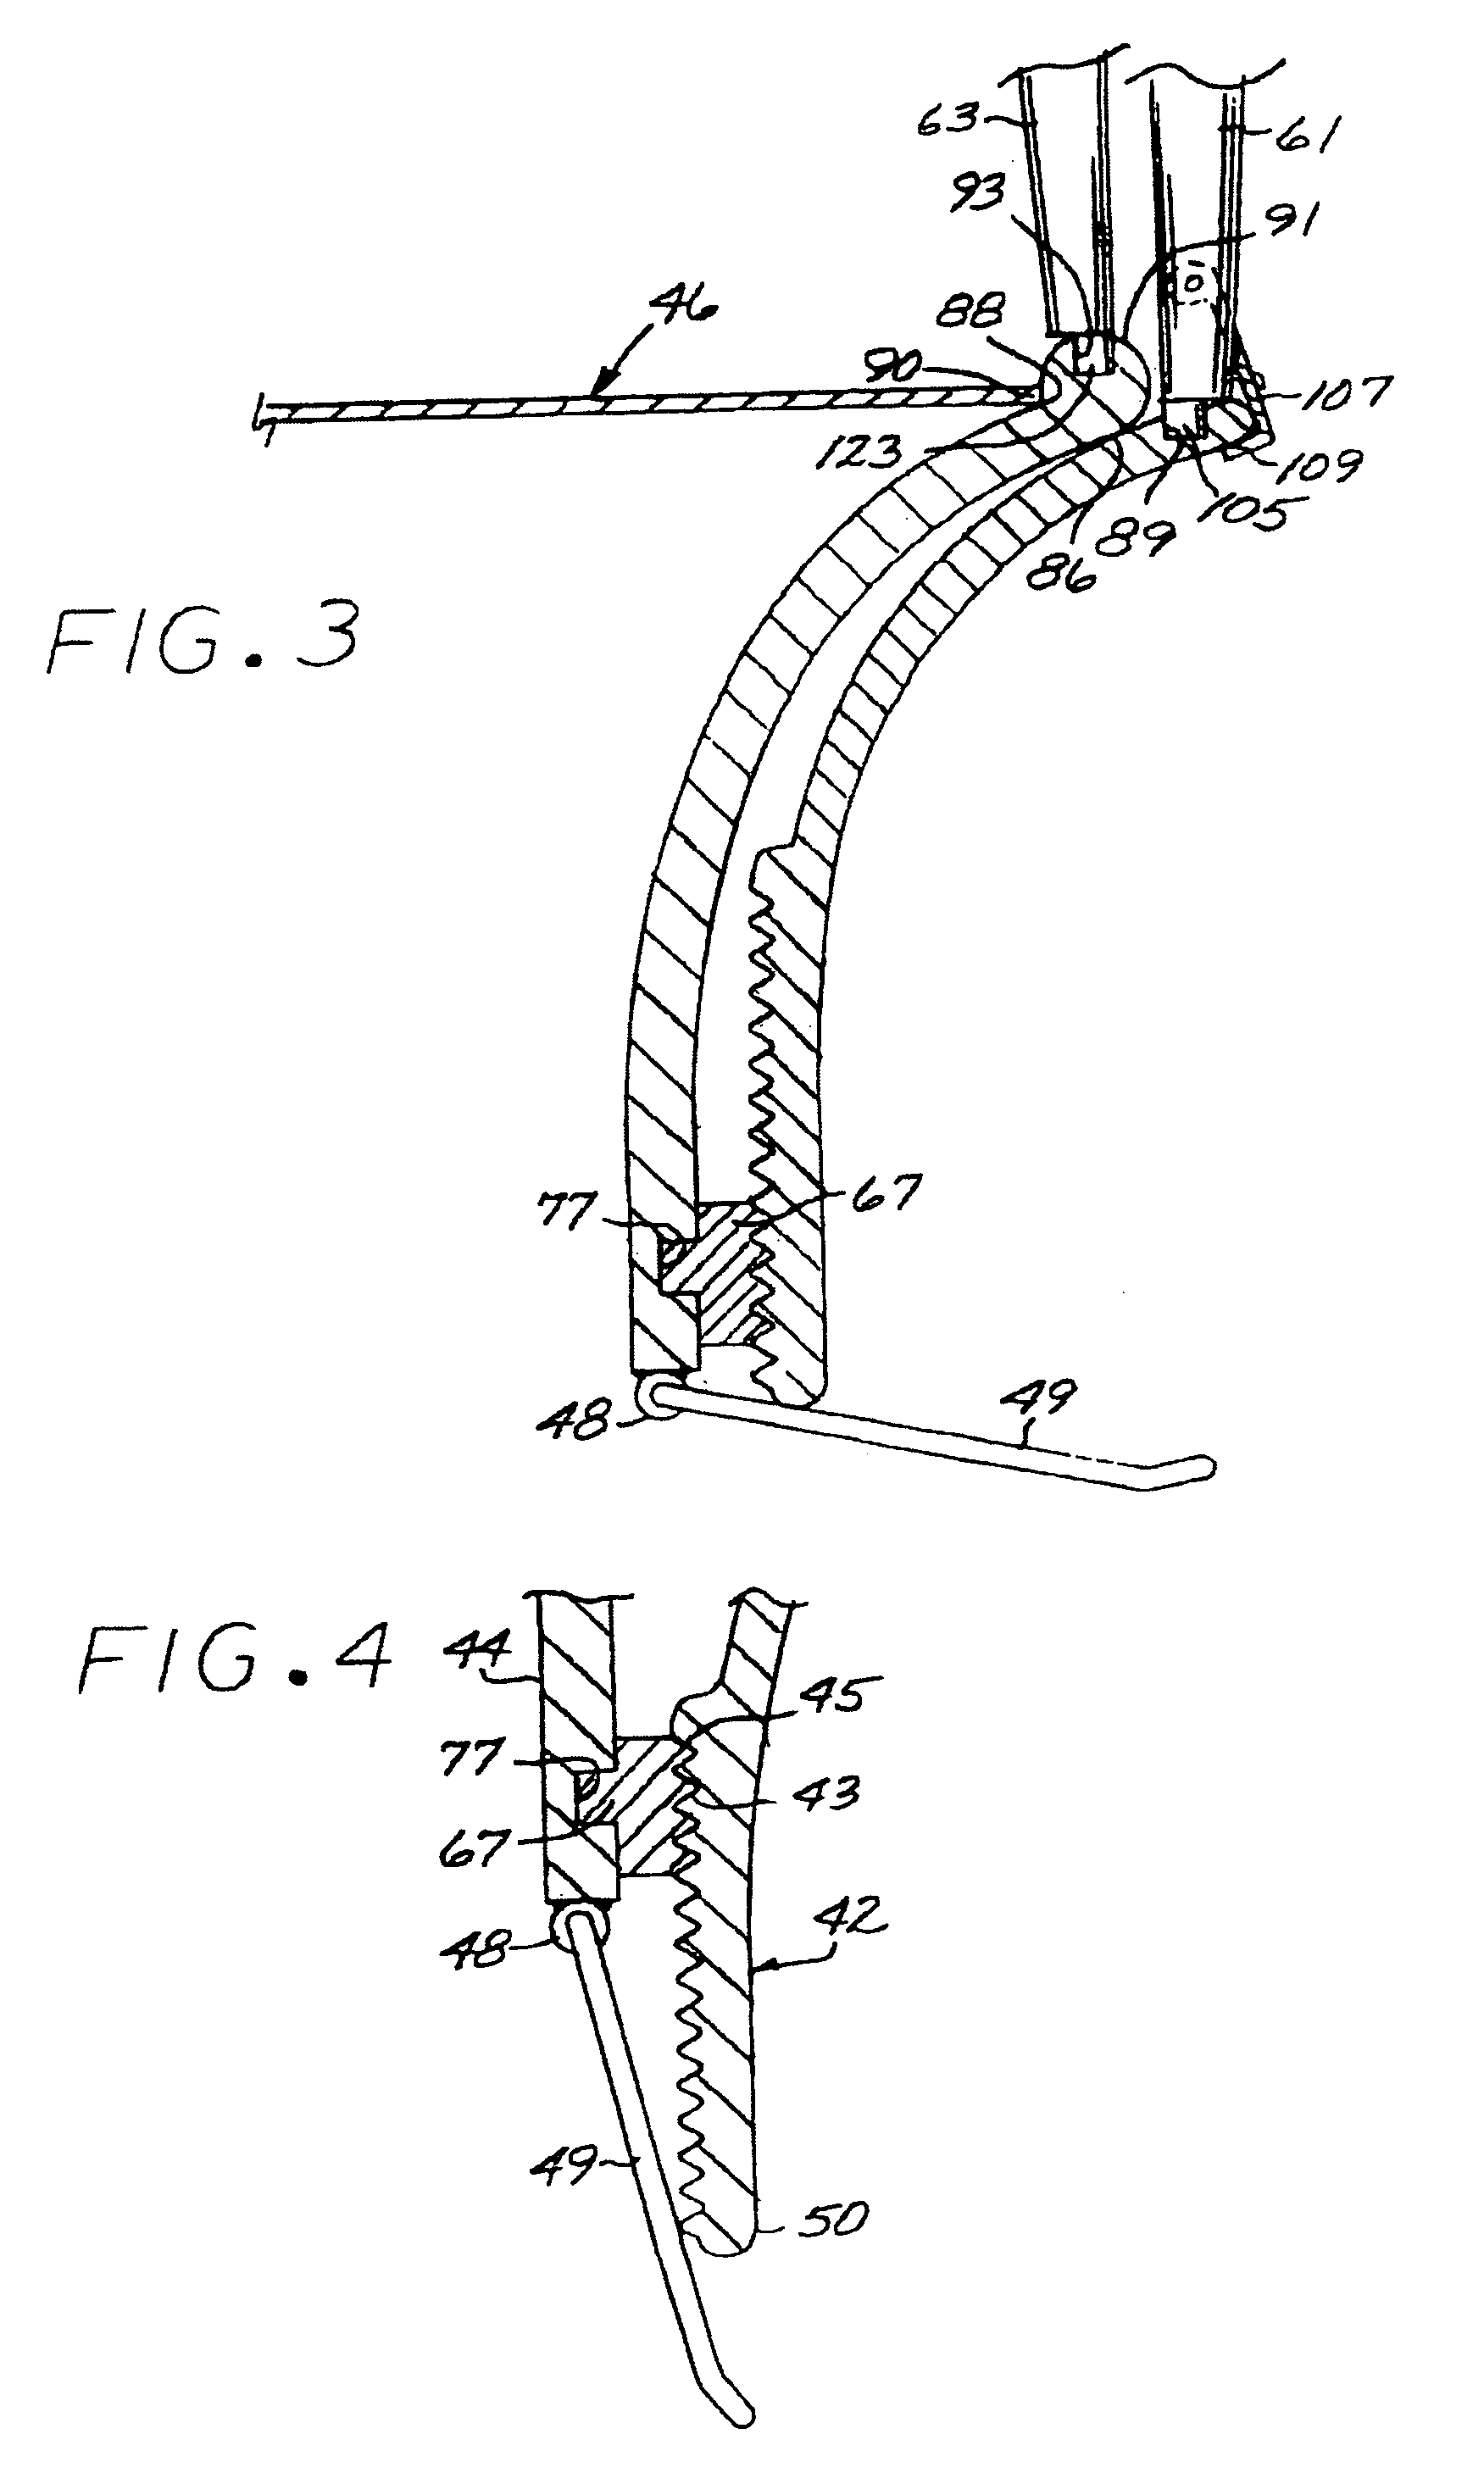 Heart valve annulus device and method of using same